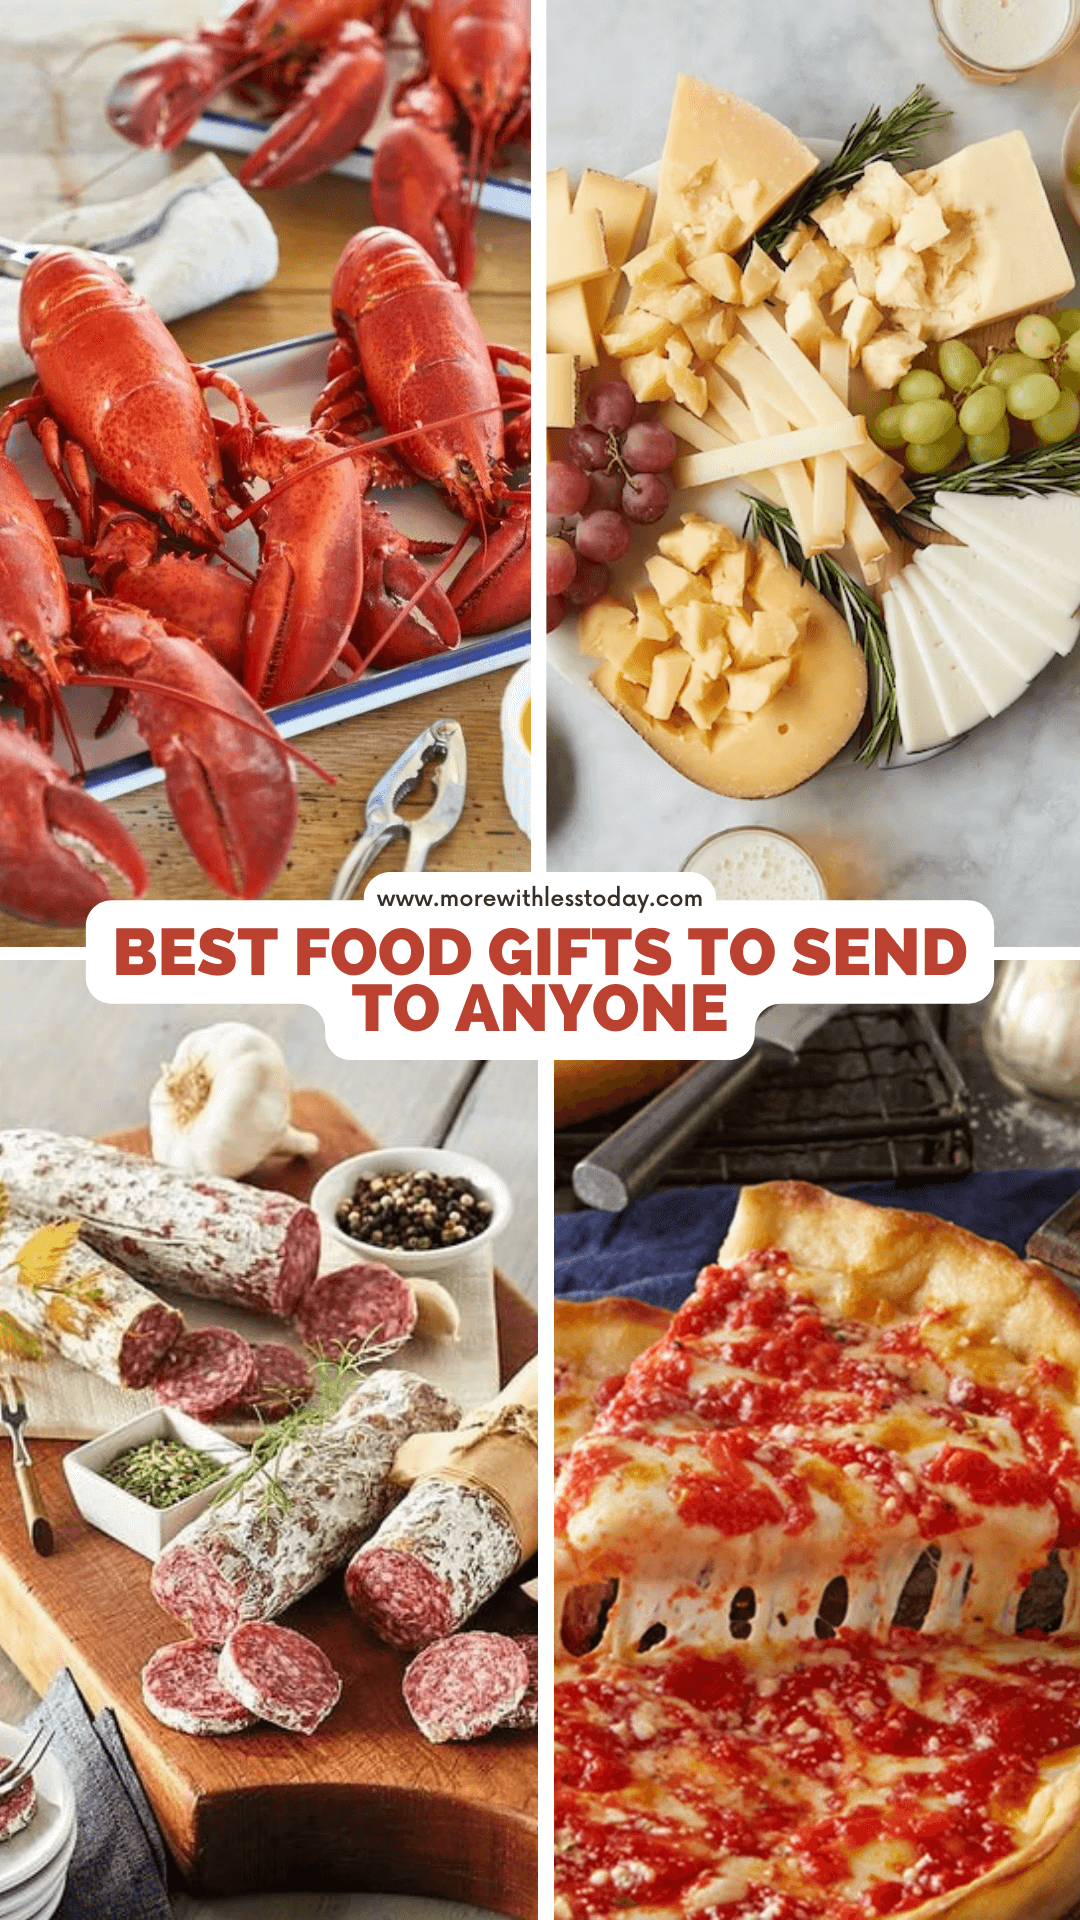 Best Food Gifts to Send Anyone - PIN